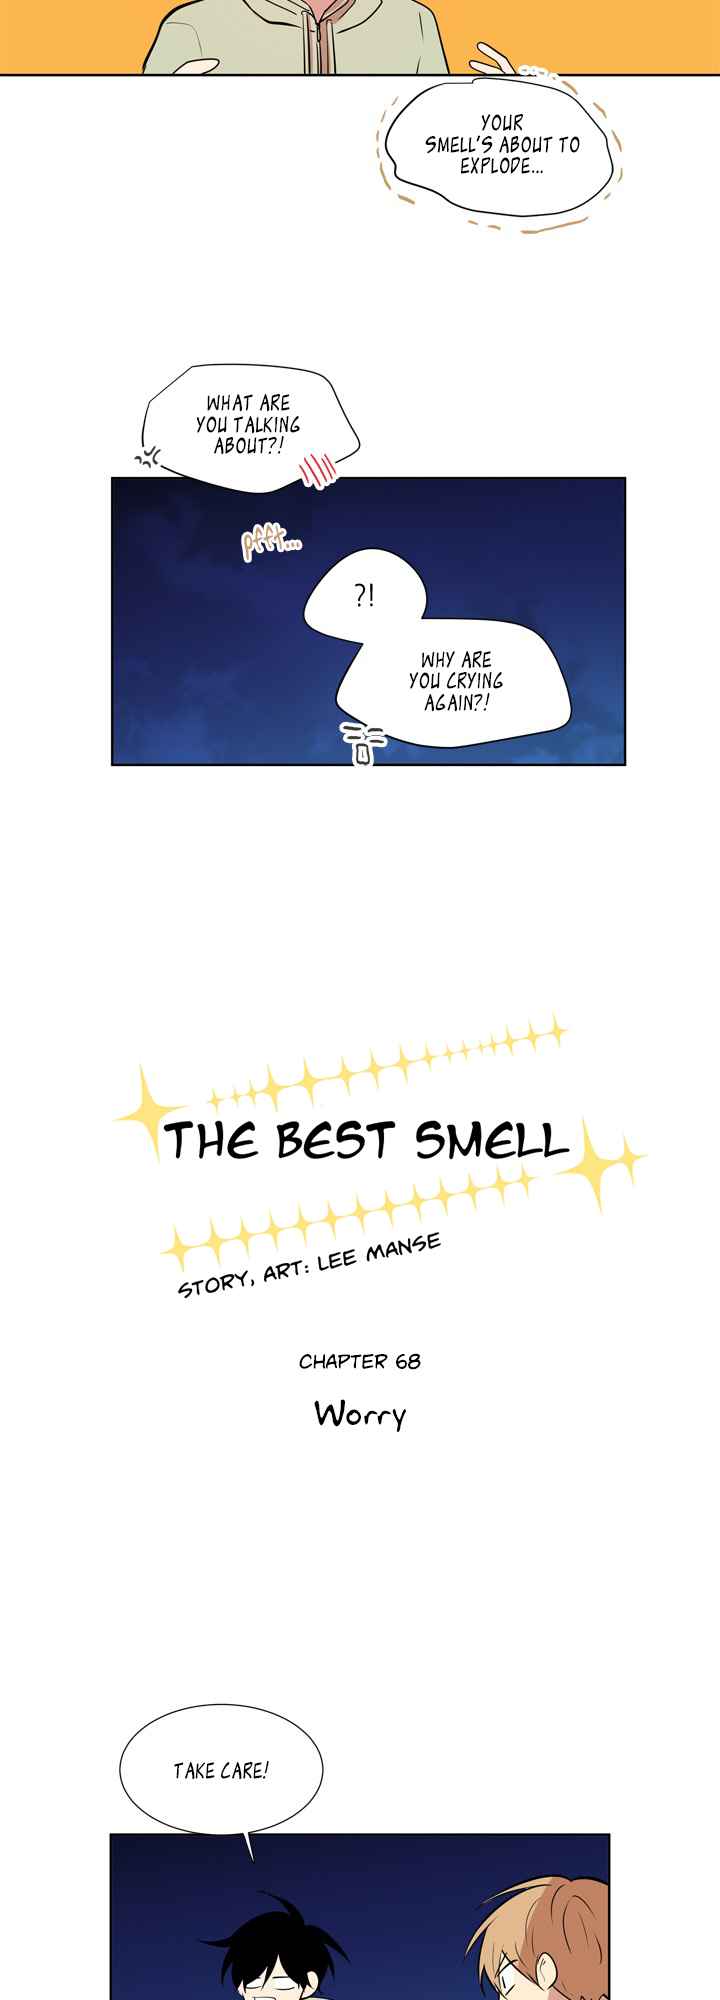 The Best Smell Ch. 68 Worry